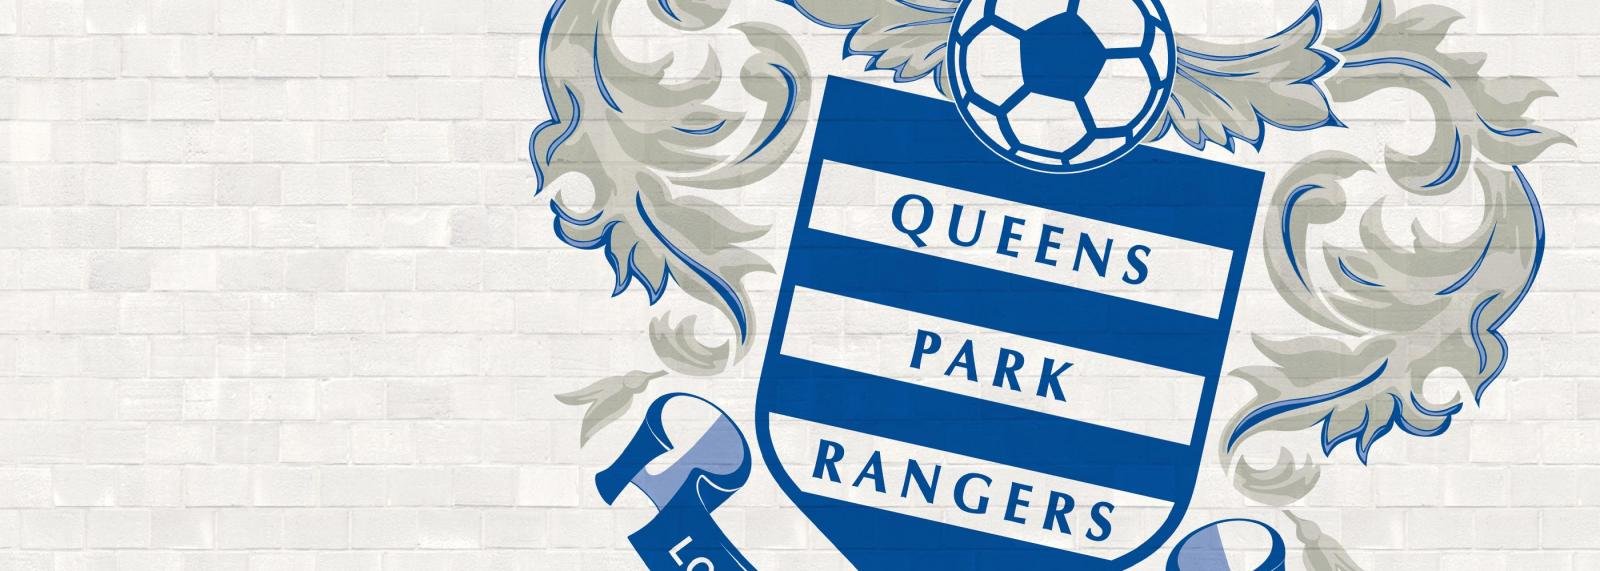 Hasselbaink weighing up next term’s QPR squad during end of campaign ‘pre season’